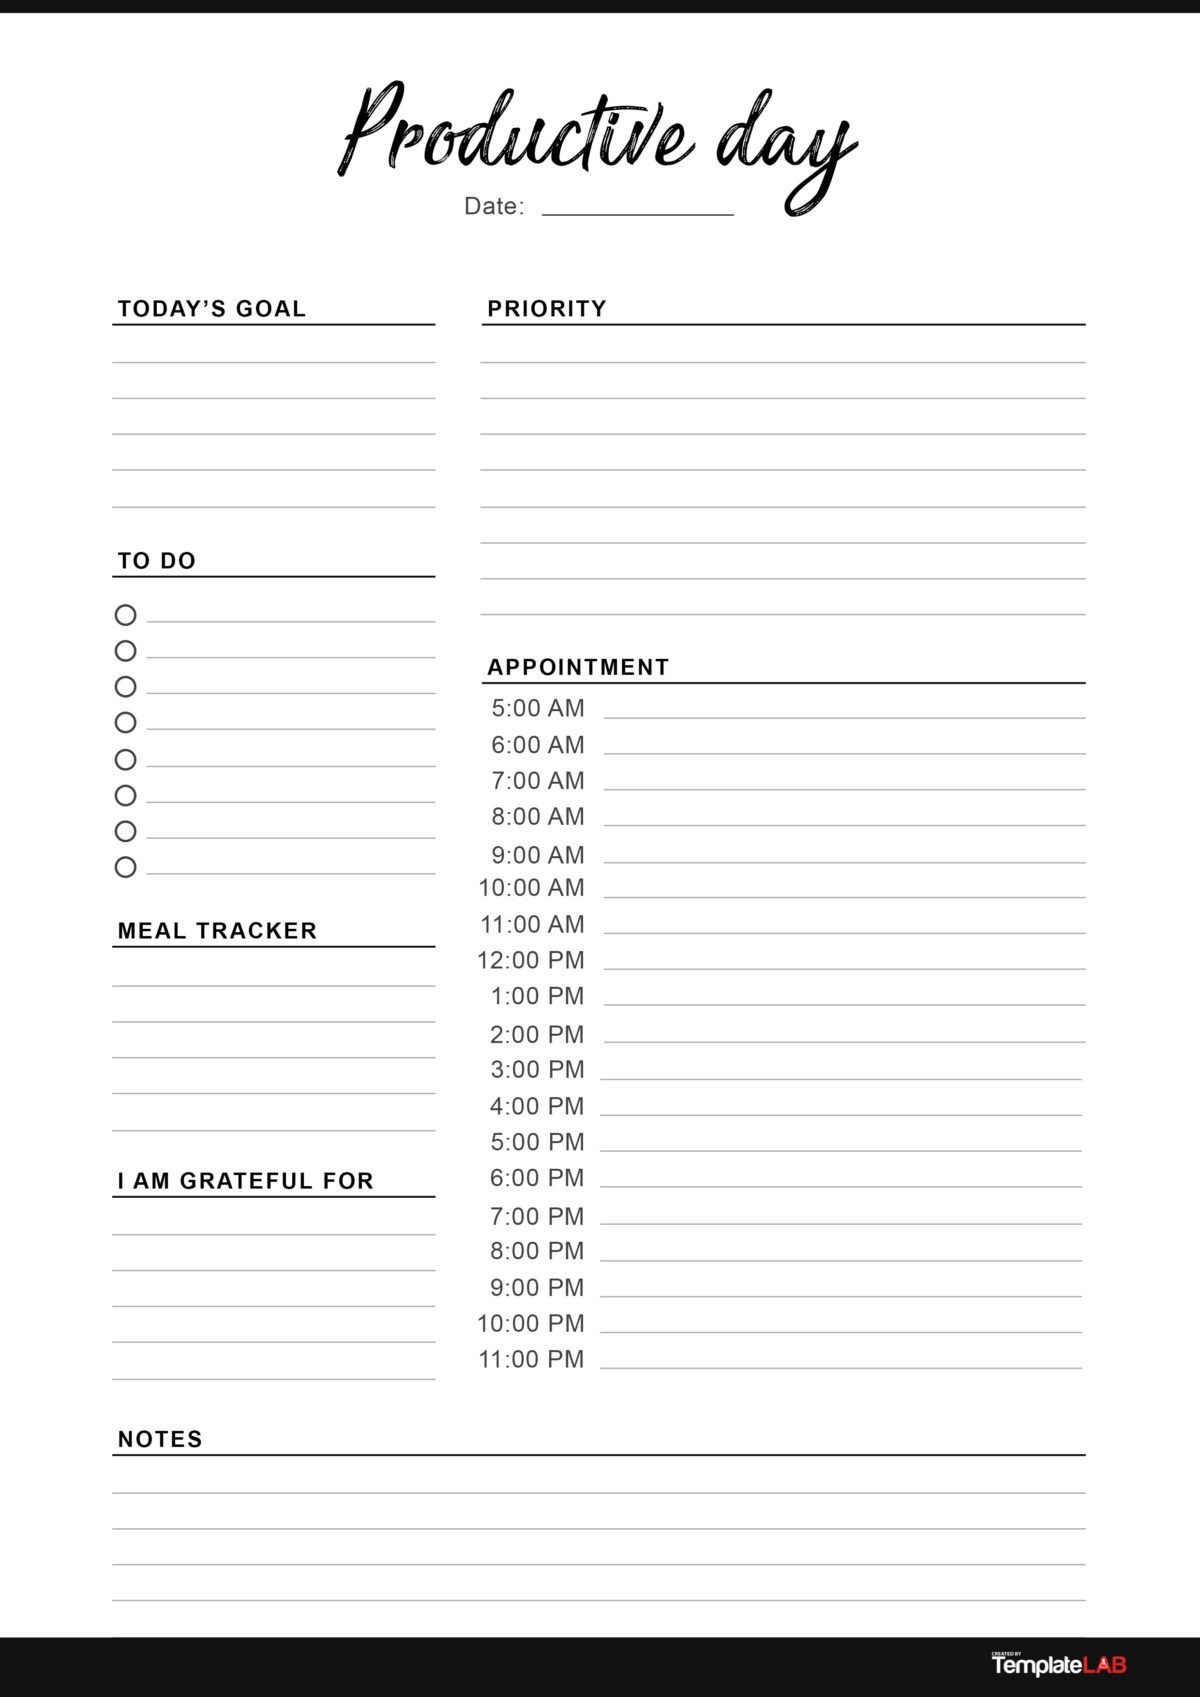 Daily Working Planner Chart Printable Productivity Planner Work Day Organizer To-Do List Digital Download List Hourly Planning Chart